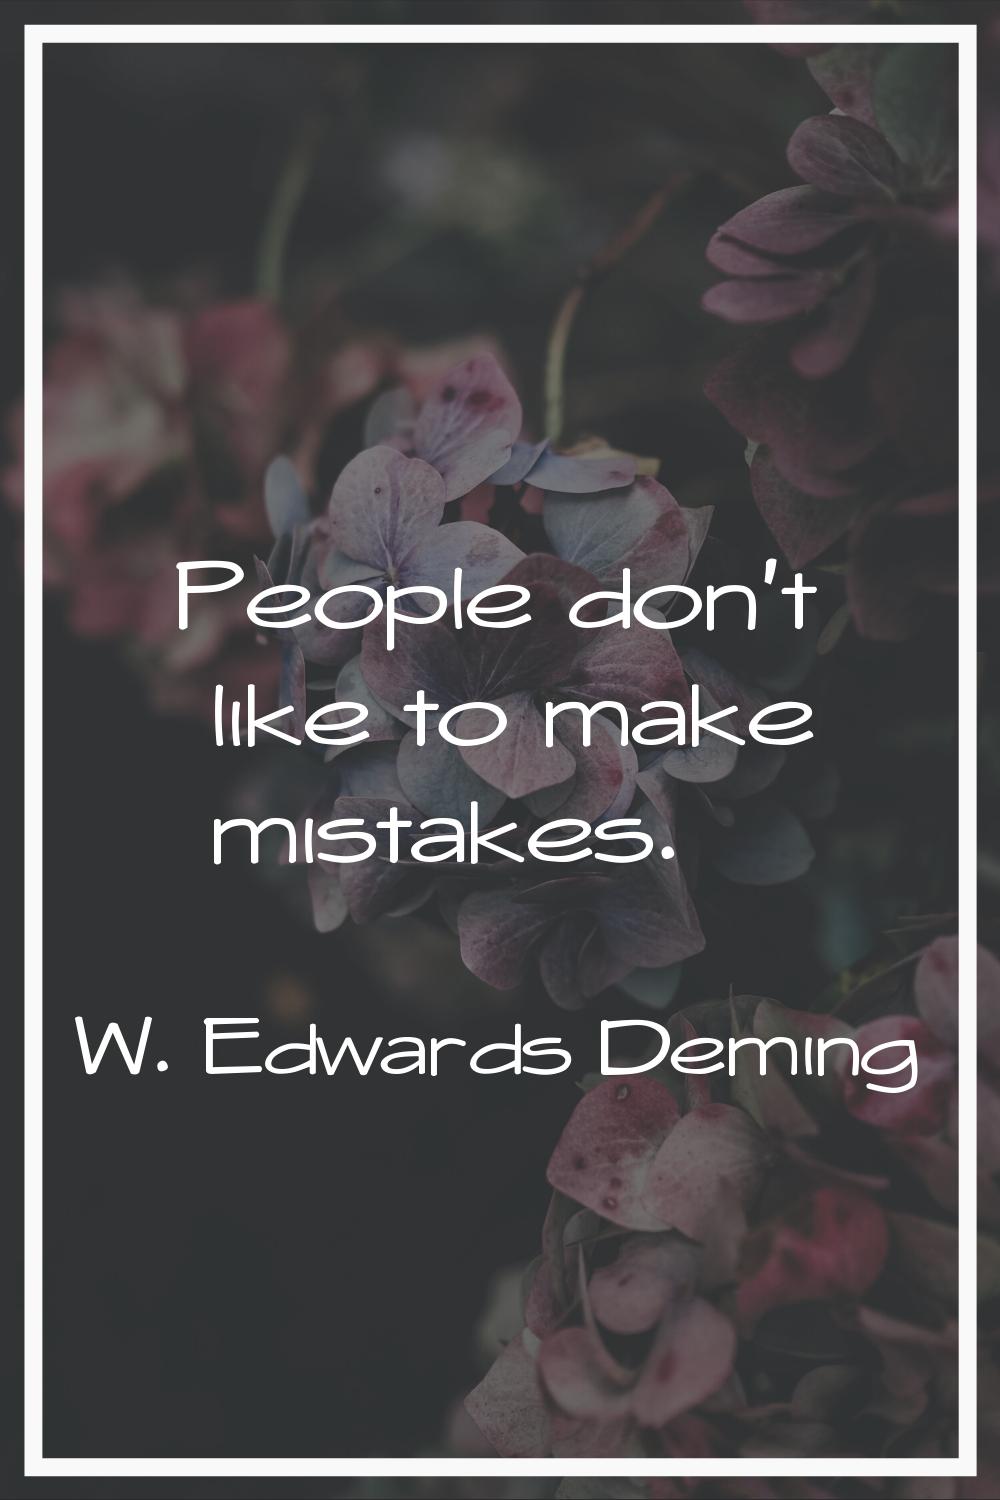 People don't like to make mistakes.